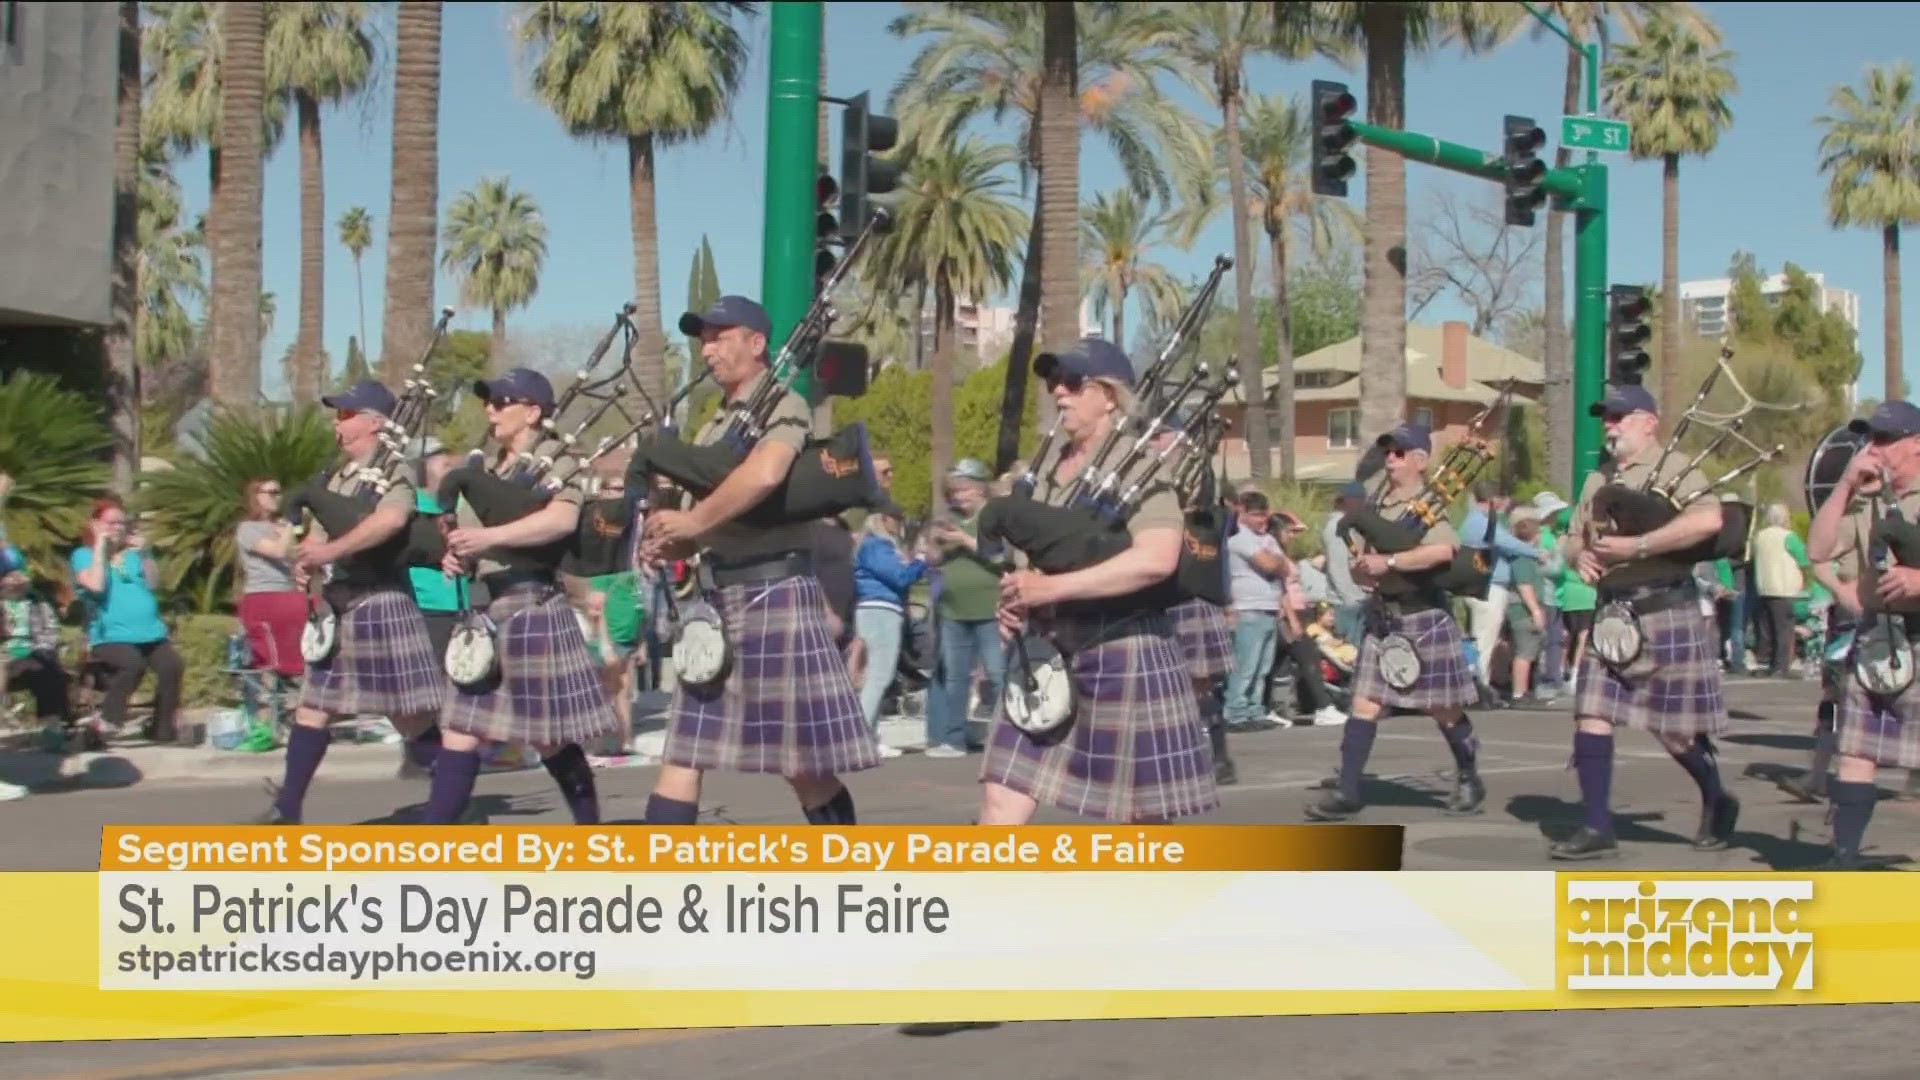 Mackenzie Shane, the 2023 Arizona Colleen, shares details about the 40th Annual St. Patrick’s Day Parade and Faire taking place in Downtown Phoenix Saturday.